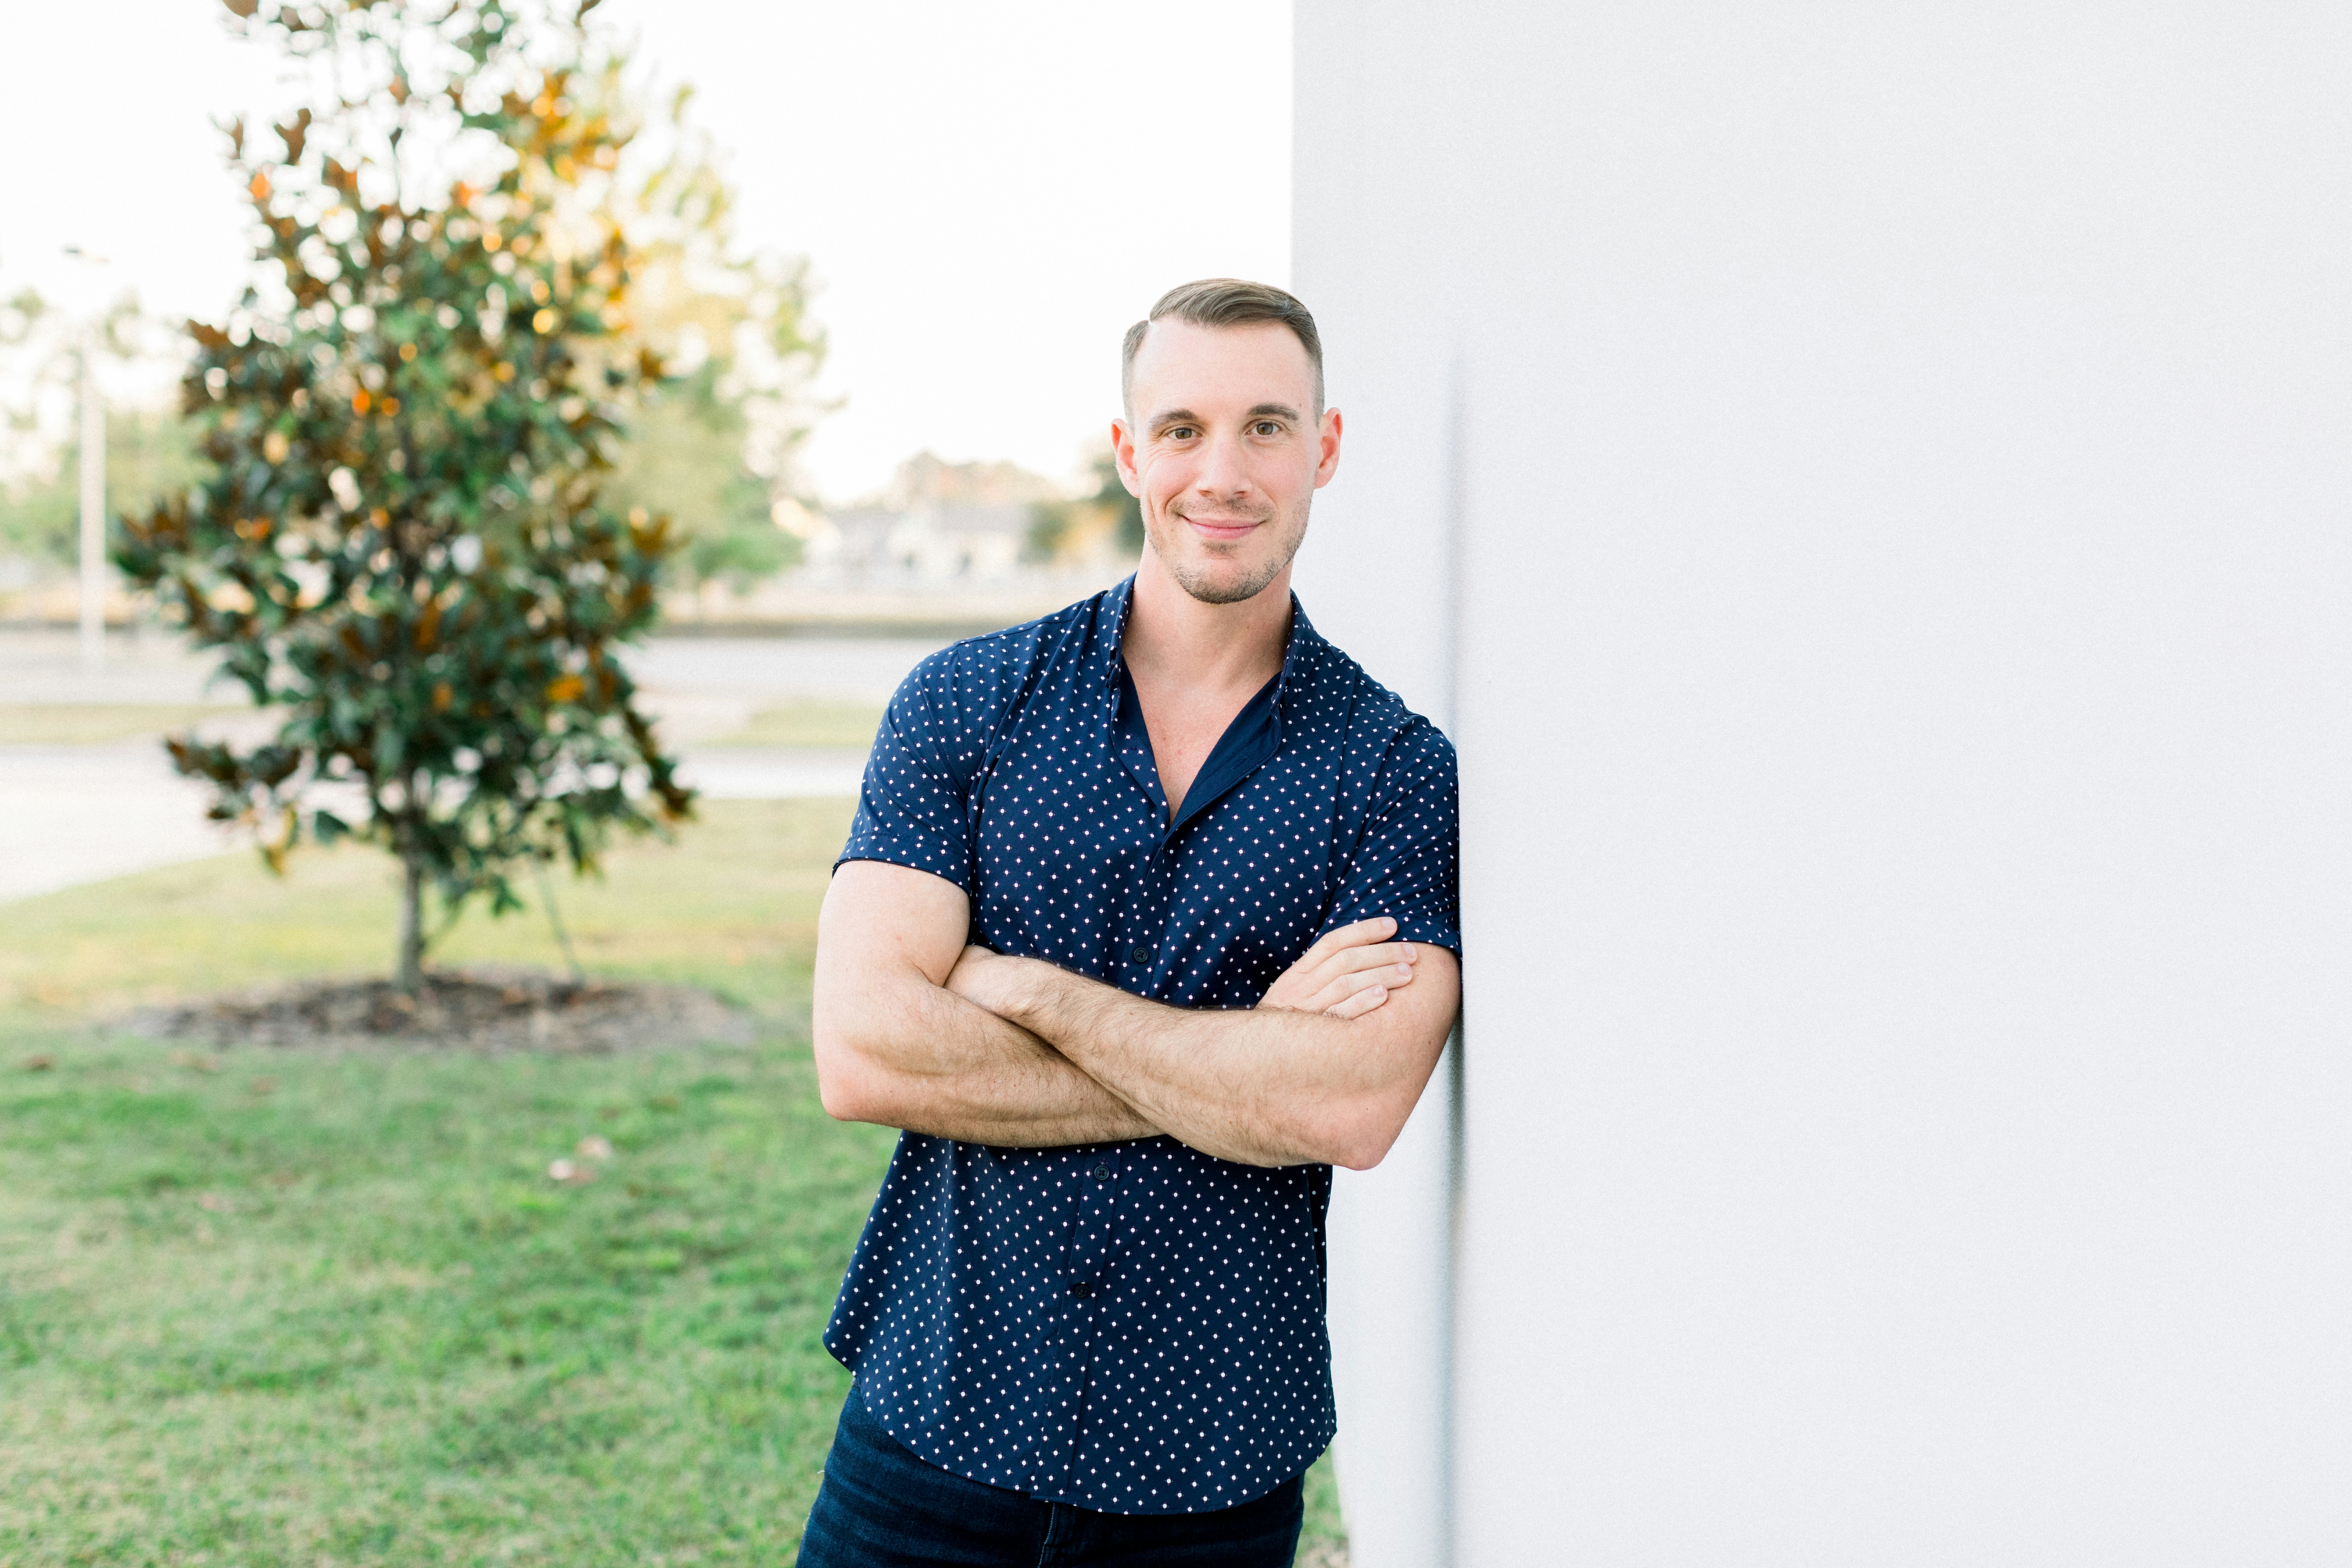 great photo recipe,how to photograph alex sanfilippo, the founder of podpros, confidently leaning against a wall with arms crossed out on the lawn. model alex sanfilippo, the founder of podpros @ podpros.com; a man leaning against a wall with his arms crossed